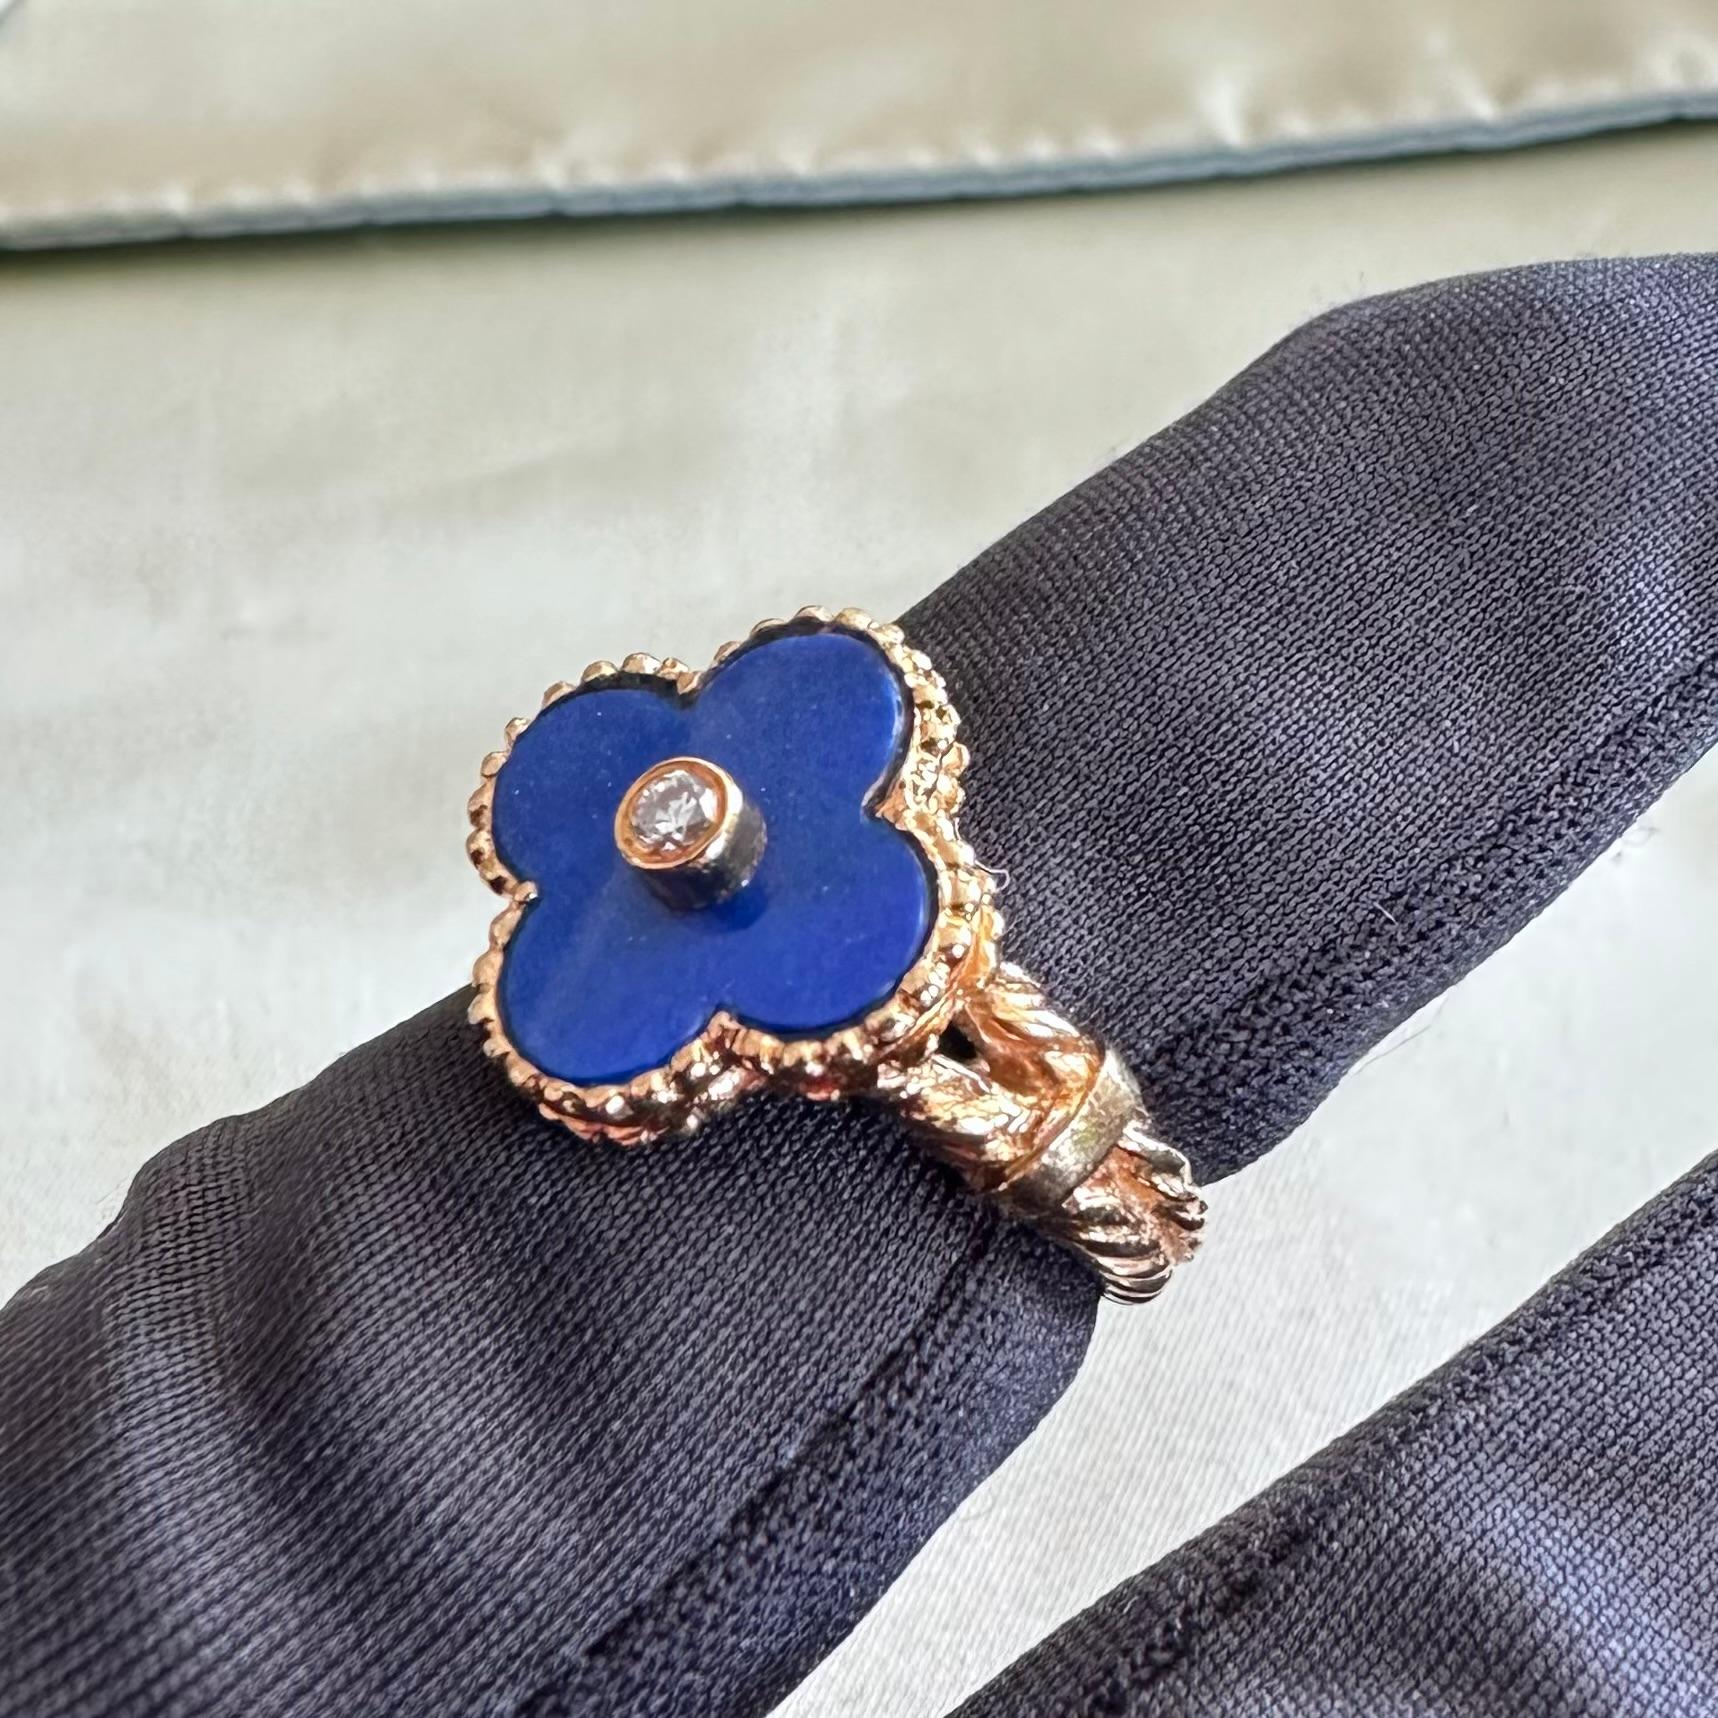 Van Cleef & Arpels Vintage Alhambra Ring
features Lapis Lazuli lucky clover Motif. 18k yellow gold and bezel-set brilliant-cut round diamond of an estimated 0.05 carats set in the center of the blue lapis lazuli petals. Made in France circa 1970s.